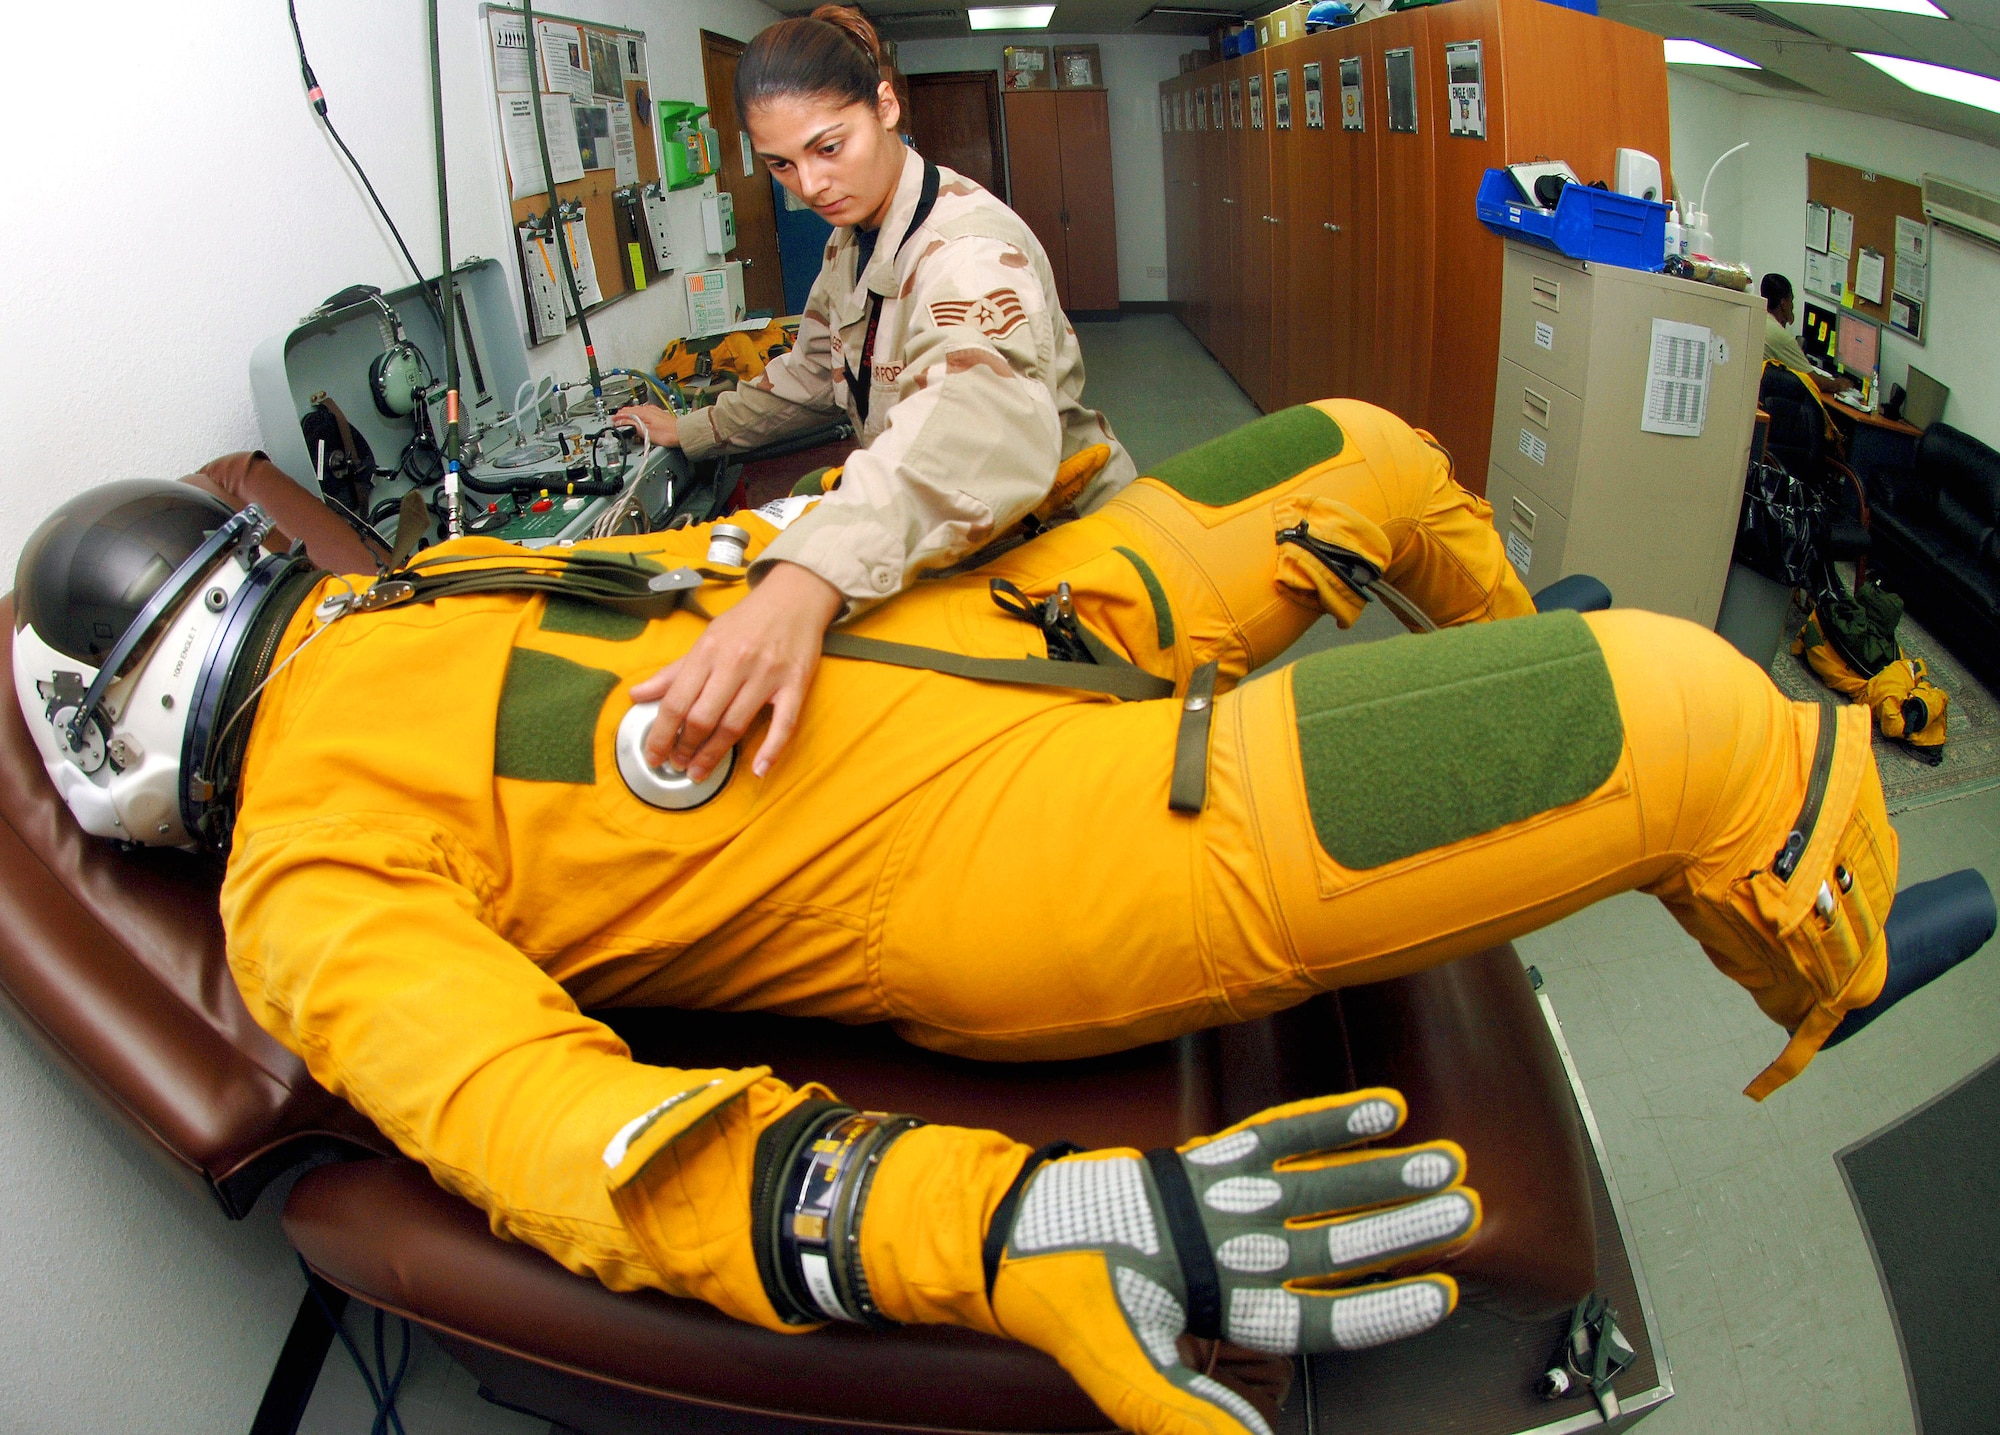 Staff Sgt. Nikolina Kreager, a life support specialist with the 99th Expeditionary Reconnaissance Squadron at an air base in Southwest Asia, ensures a U-2 Dragon Lady pilot is set for the day's mission by checking the flight suit to make sure it can pressurize properly at high altitudes.  (U.S. Air Force photo/Senior Airman Levi Riendeau)